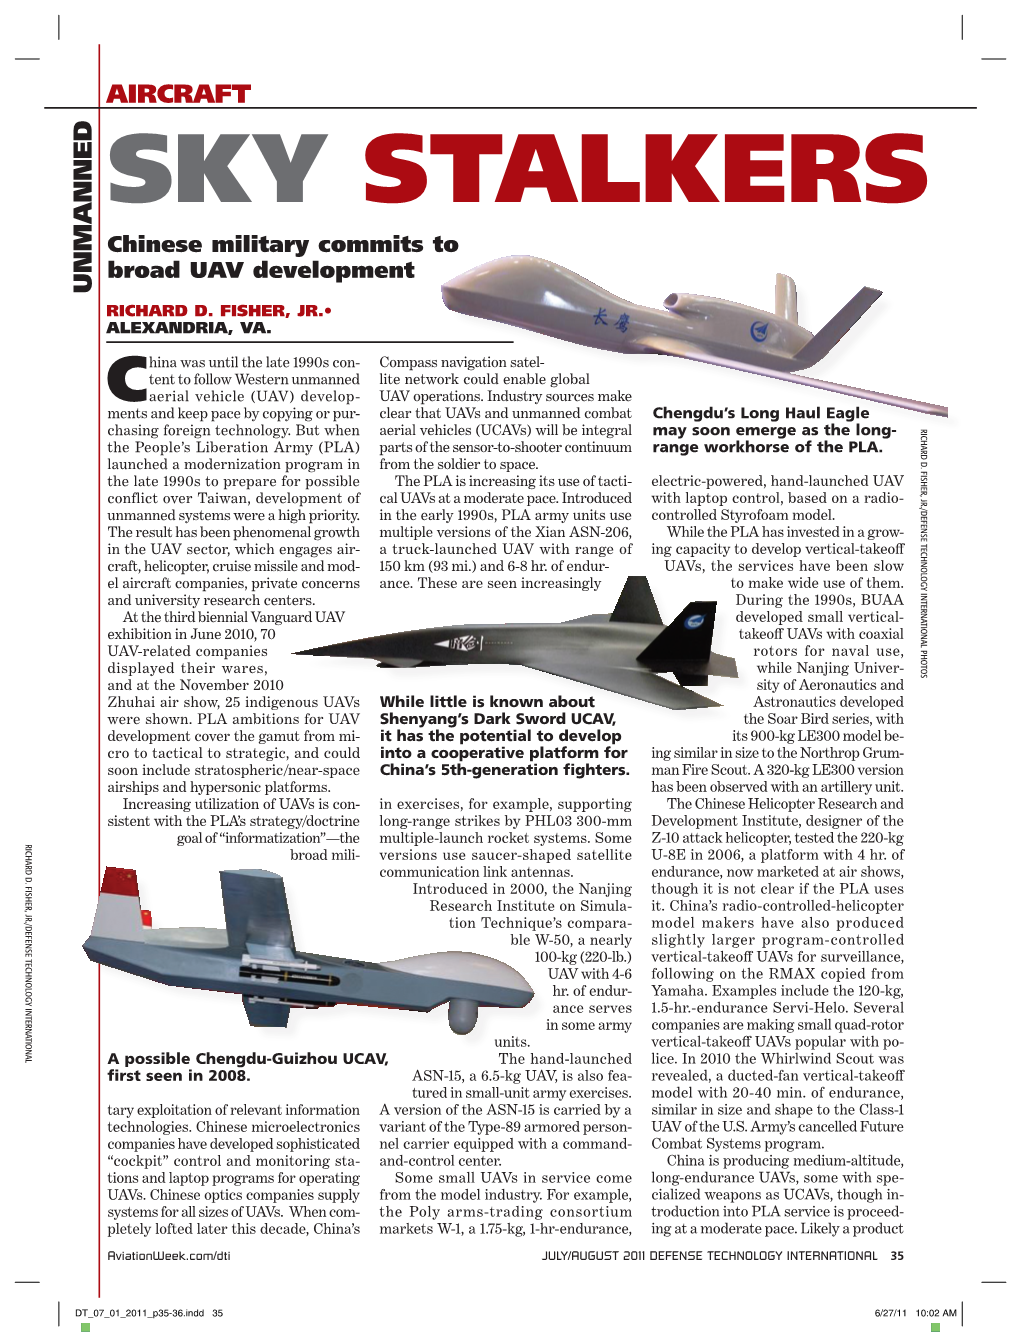 Sky Stalkers Chinese Military Commits To